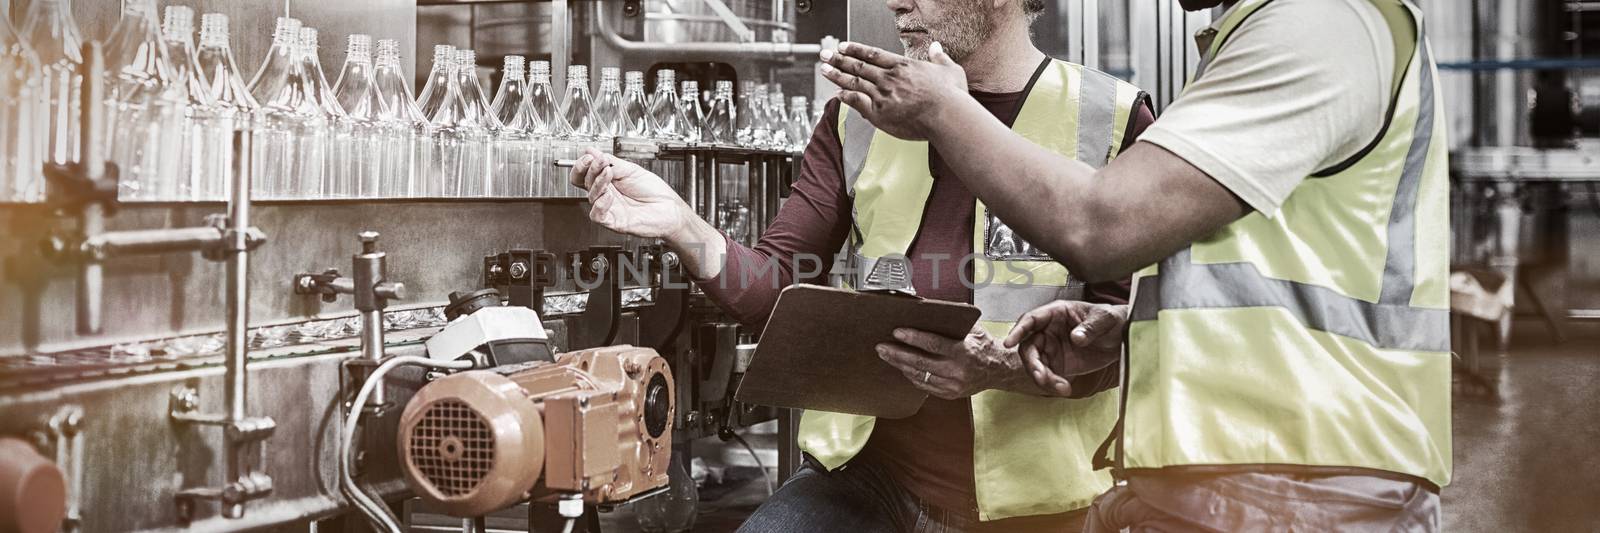 Two factory workers discussing while monitoring drinks production line at factory